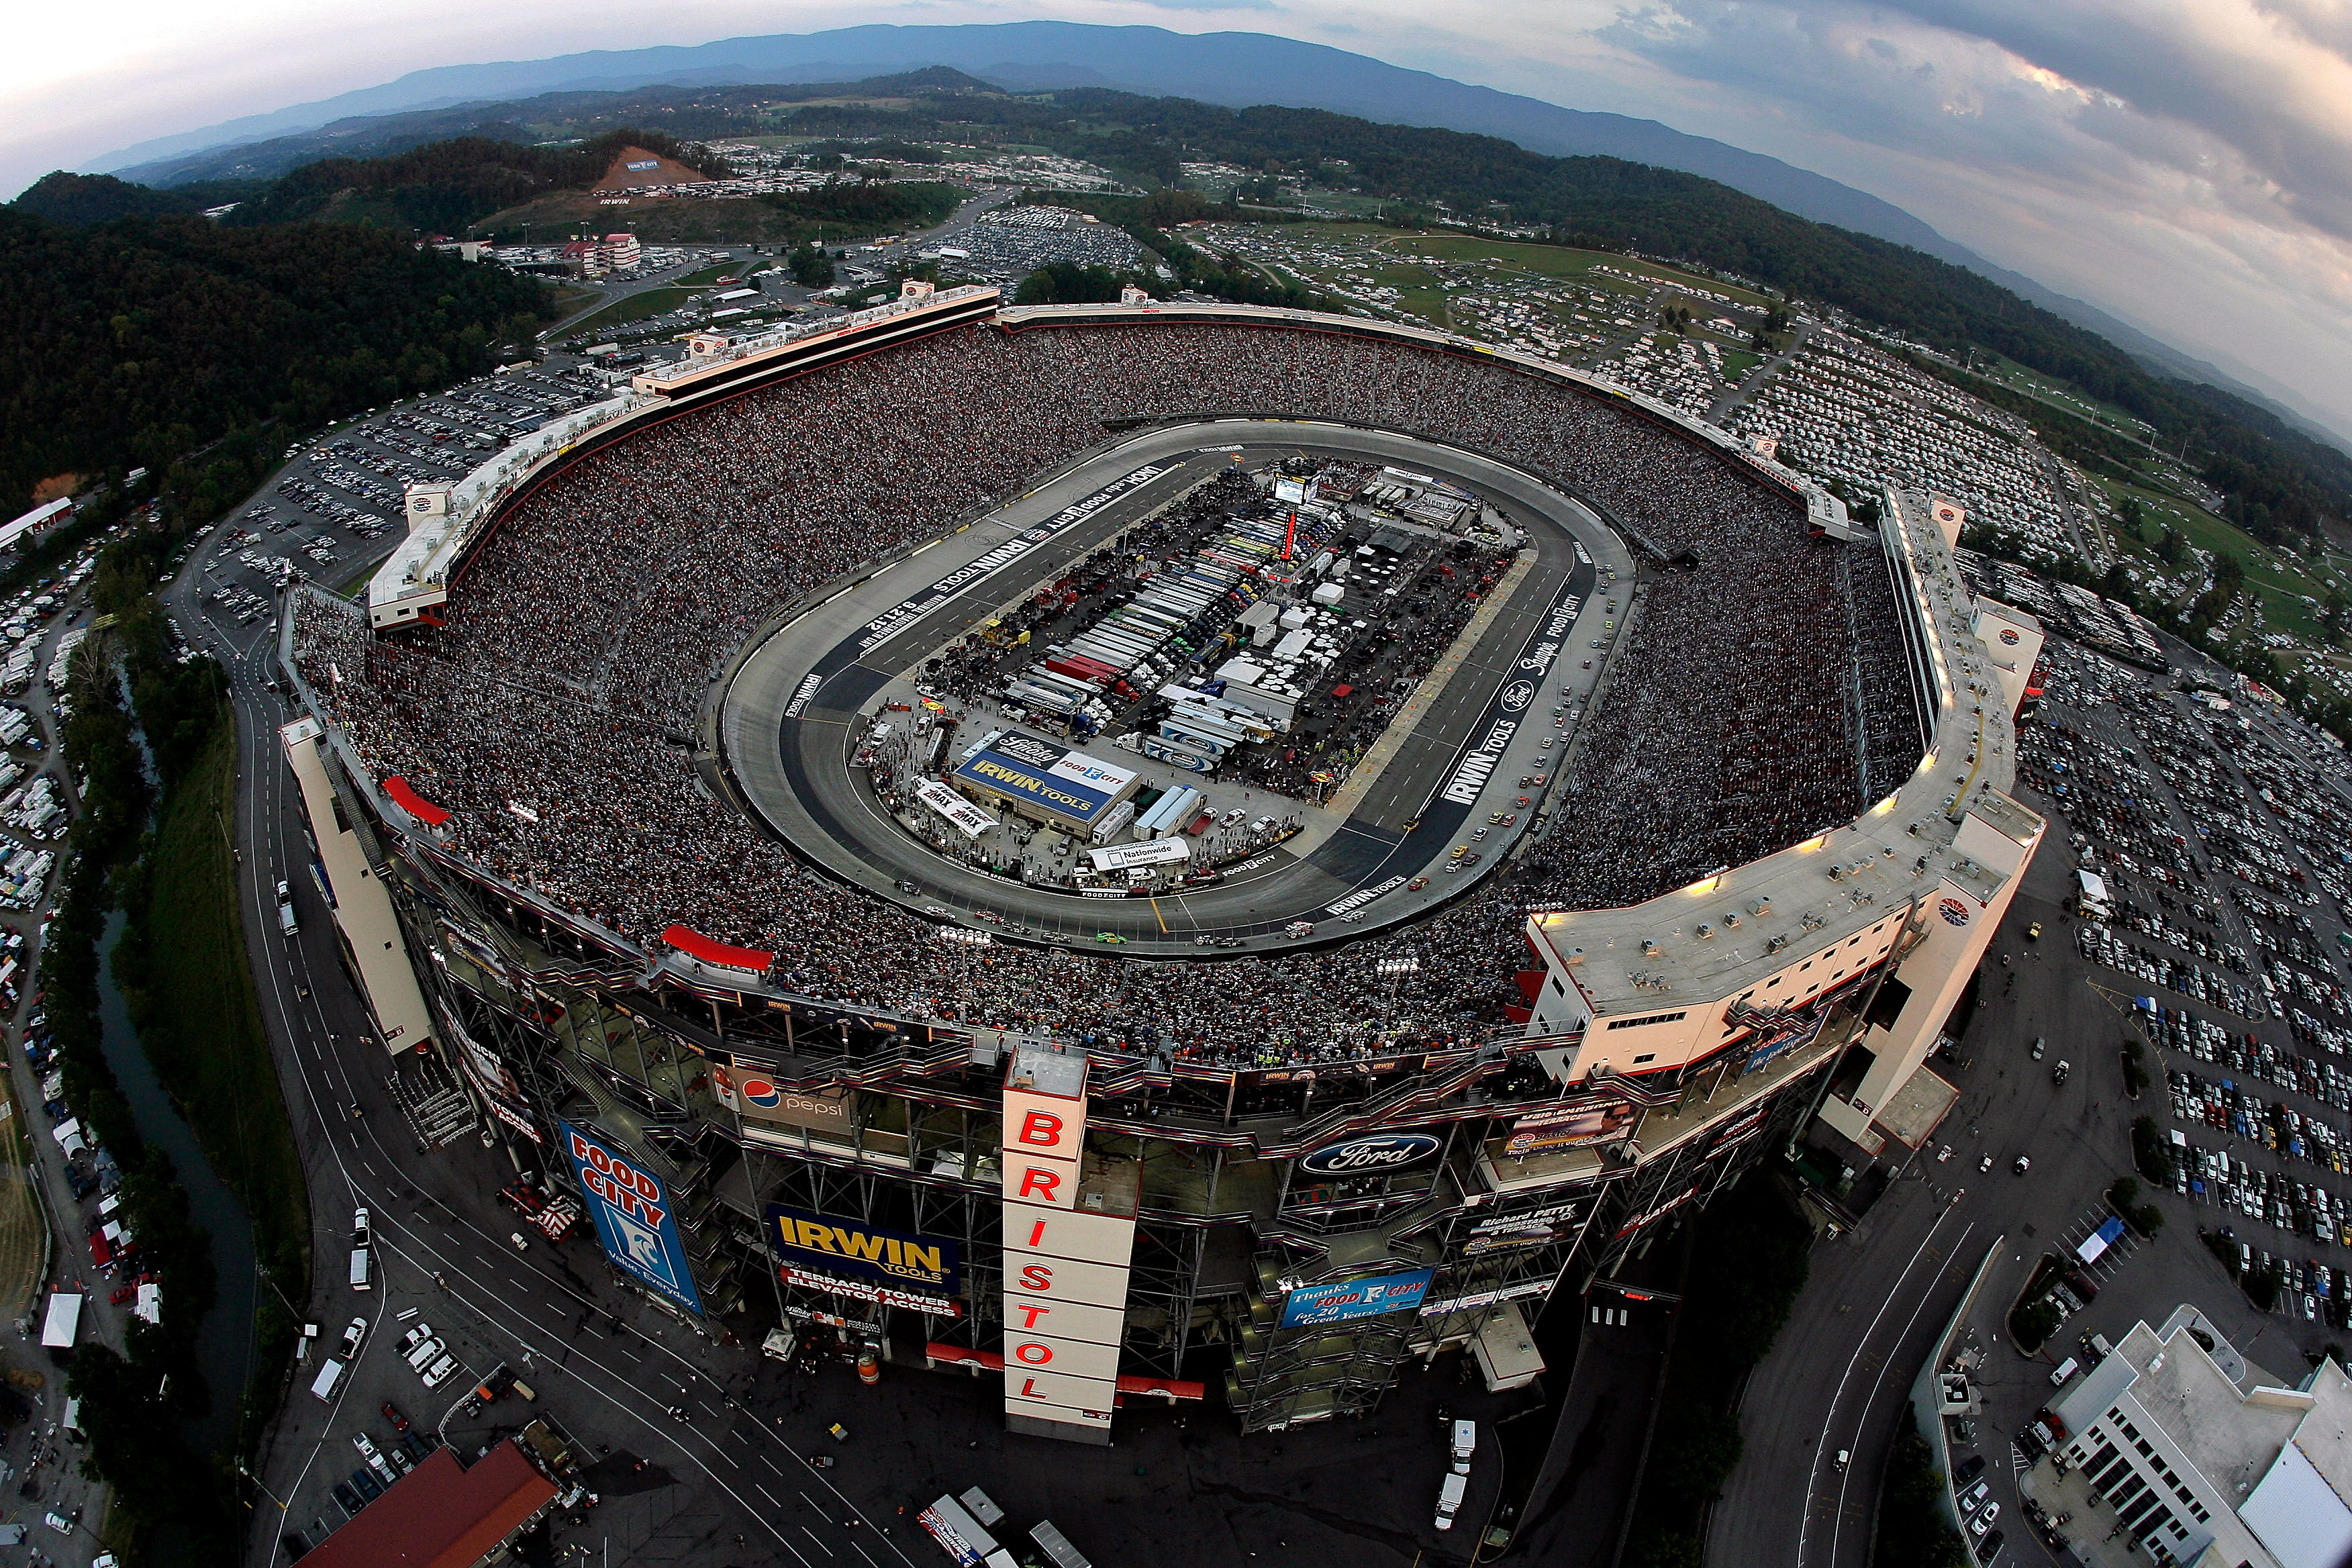 BRISTOL, TN - AUGUST 25: Cars race during the NASCAR Sprint Cup Series IRWIN Tools Night Race at Bristol Motor Speedway on August 25, 2012 in Bristol, Tennessee. (Photo by Andrew Coppley - Pool/Getty Images for NASCAR) | Getty Images